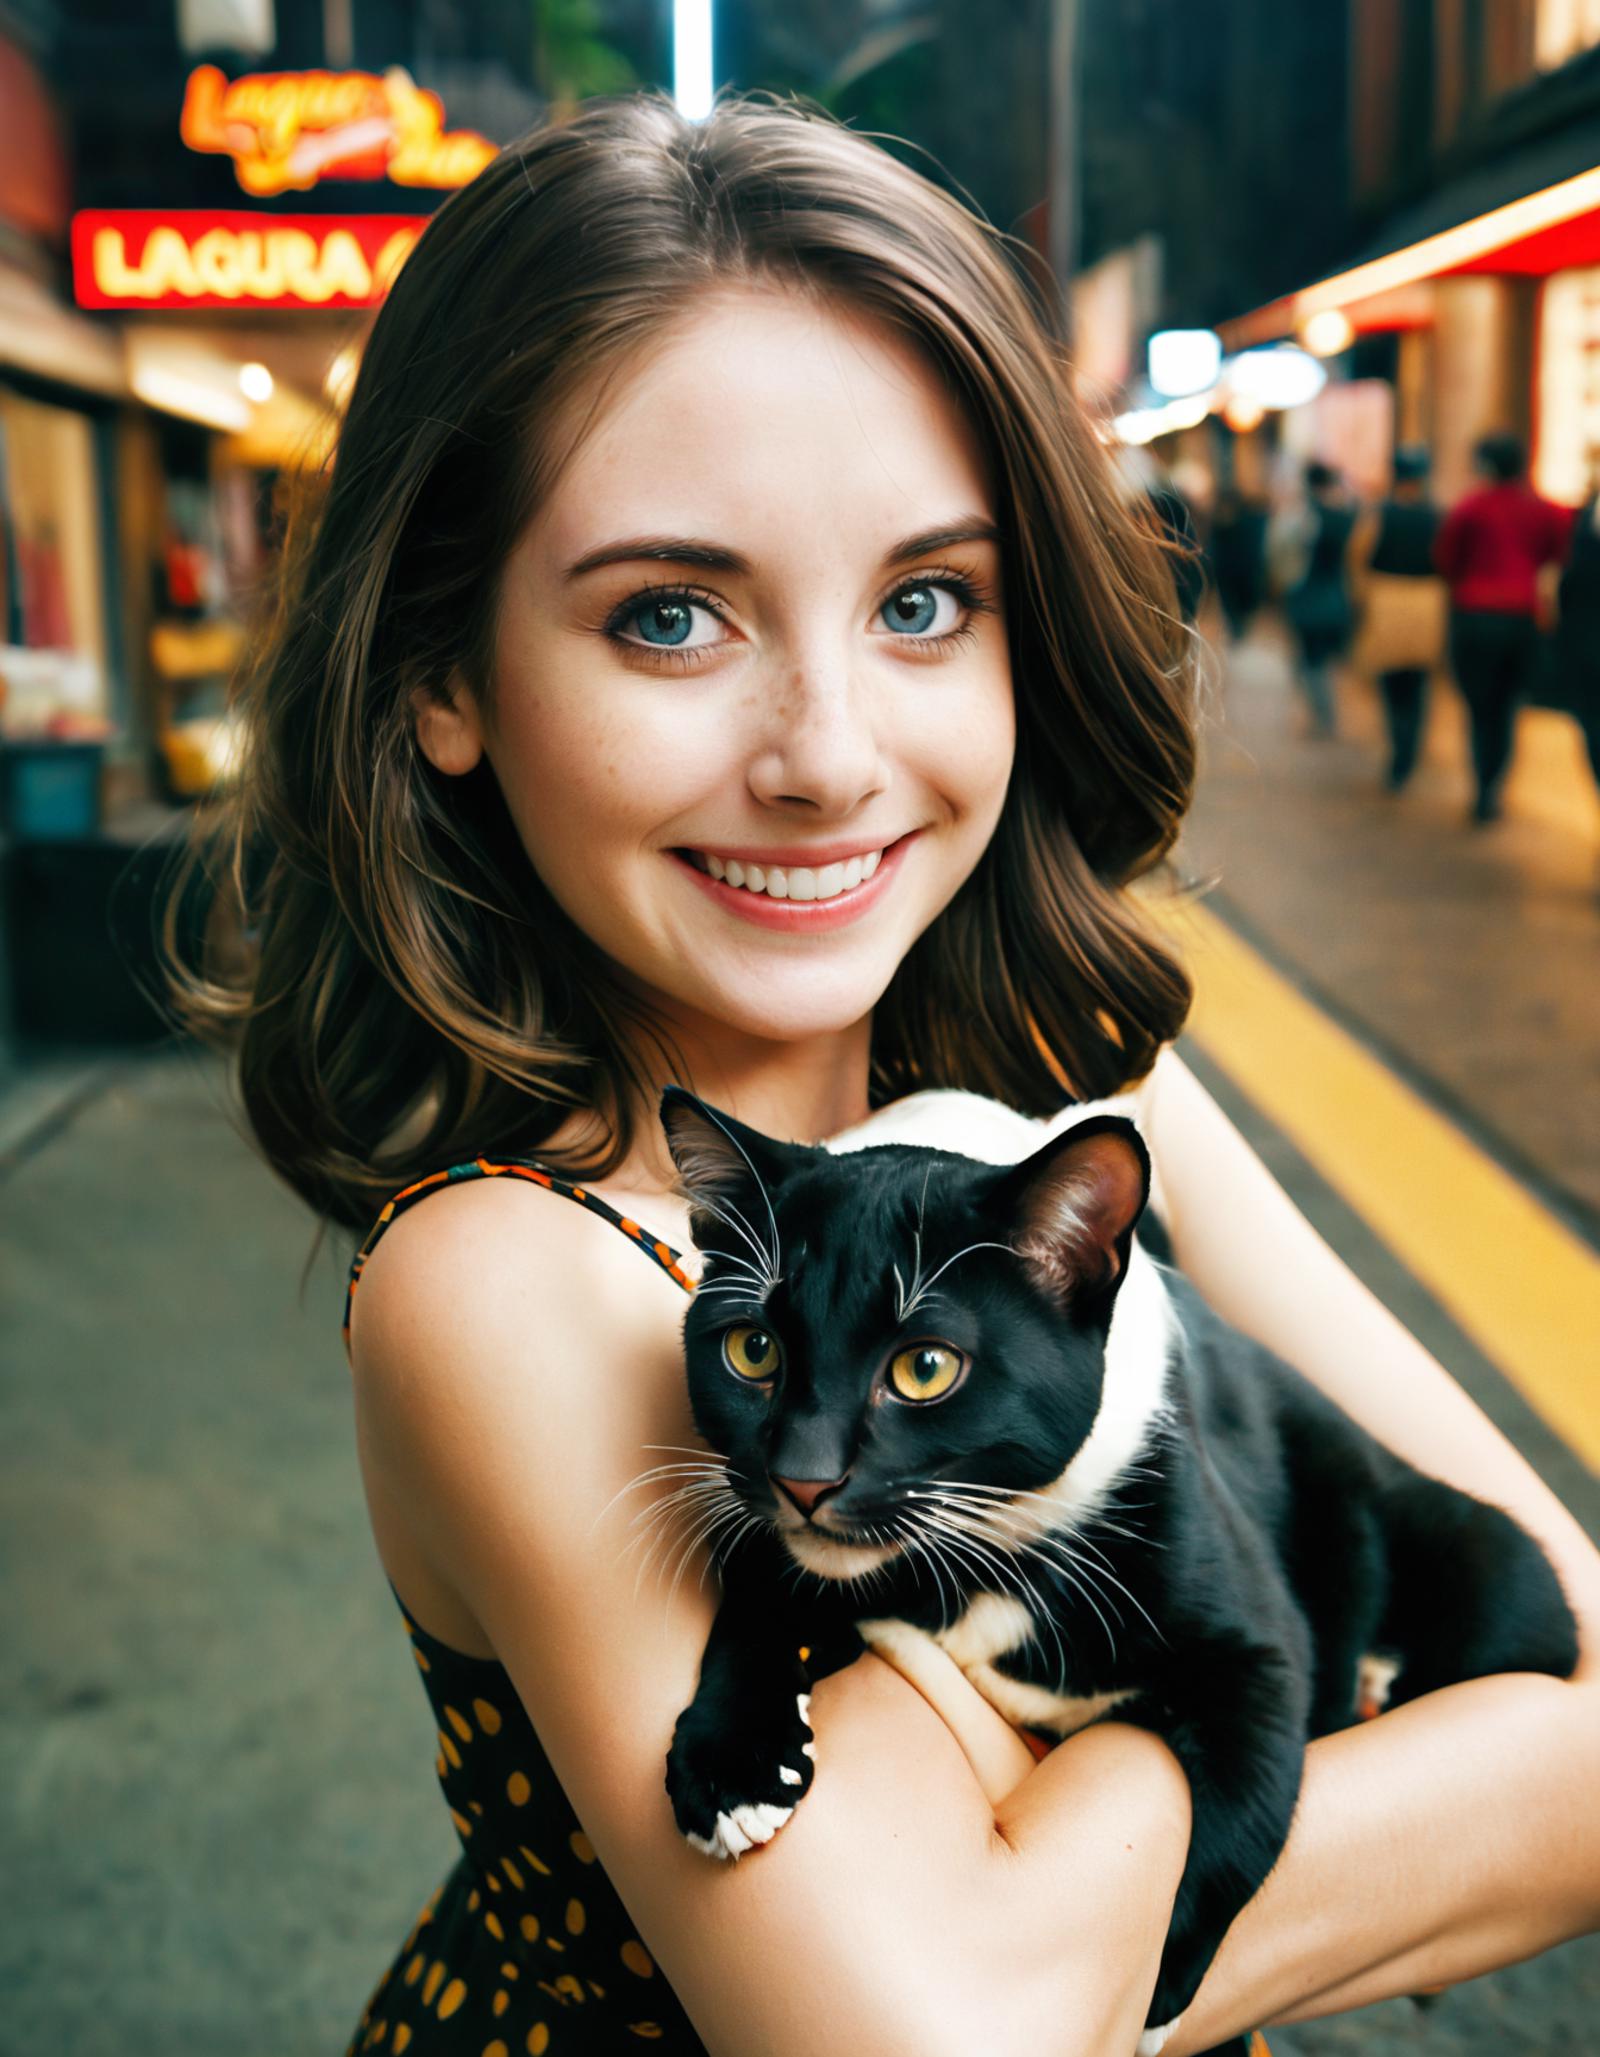 Alison Brie image by NepoBaby